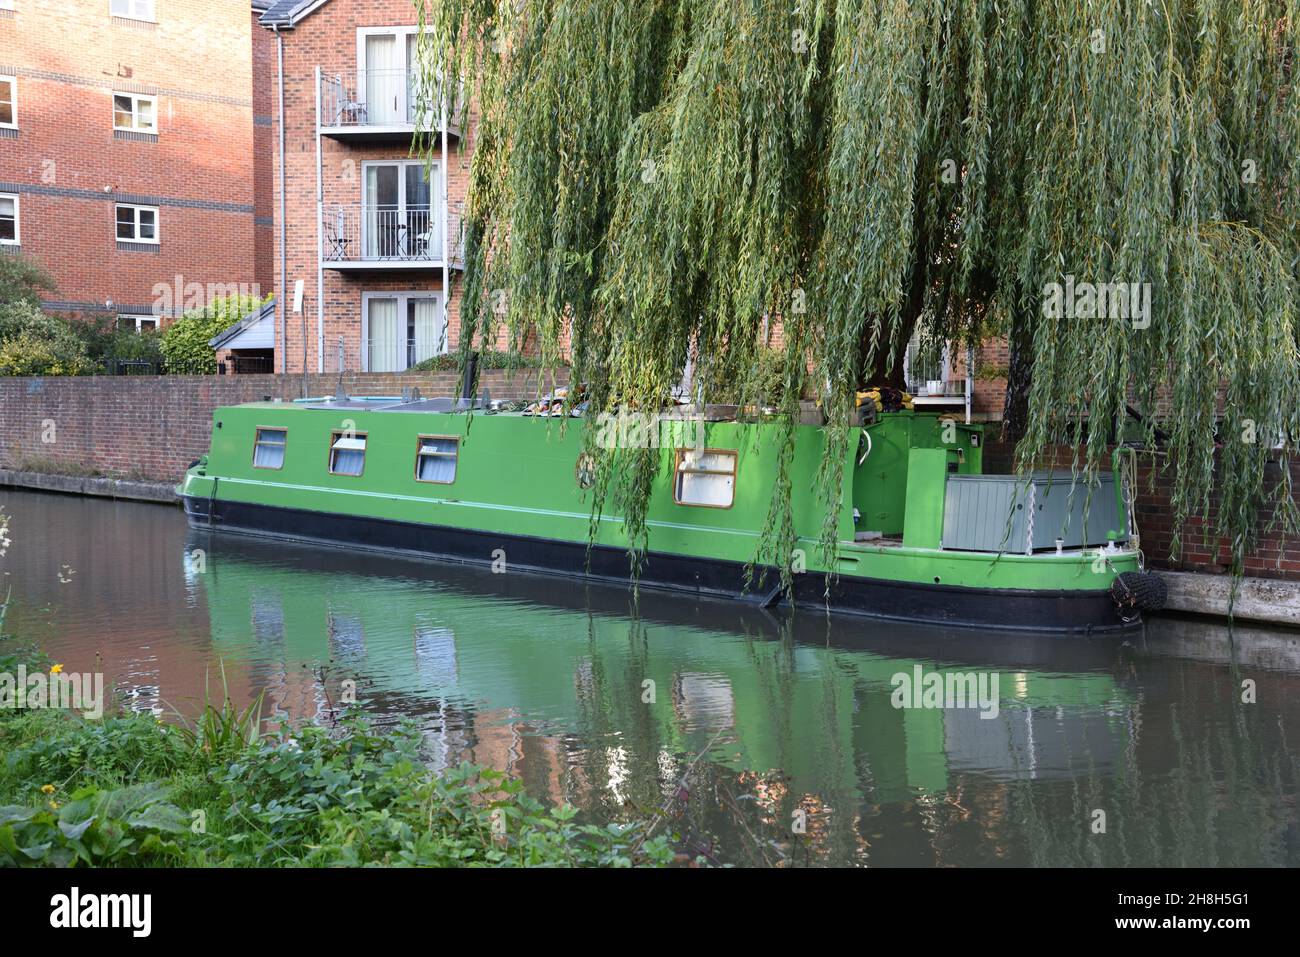 Green Canal Boat, Houseboat, Narrowboat o Long Boat & Weeping Willow sul canale di Oxford nel quartiere di Gerico Oxford Inghilterra UK Foto Stock